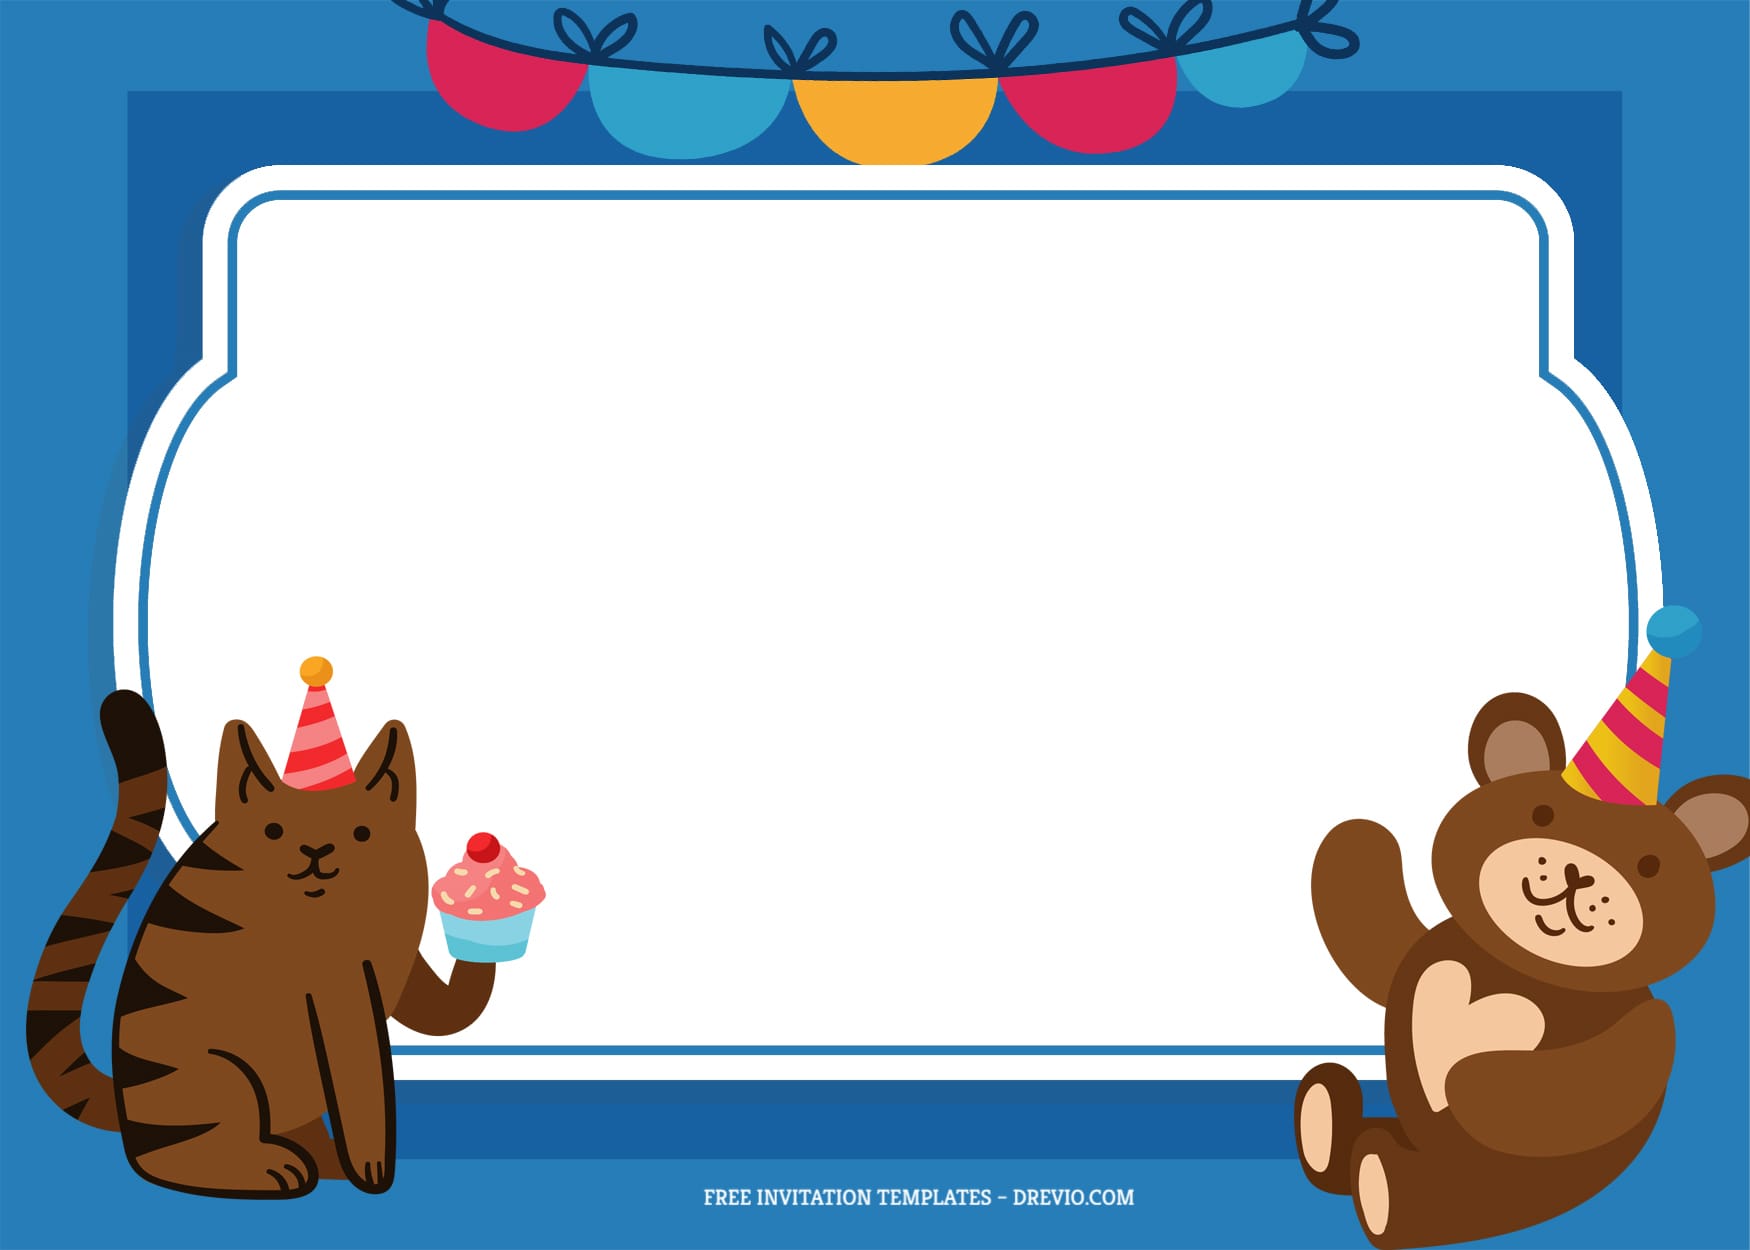 8+ Sprinkle of Happiness Cartoon Birthday Invitation Templates With Cat And Bear